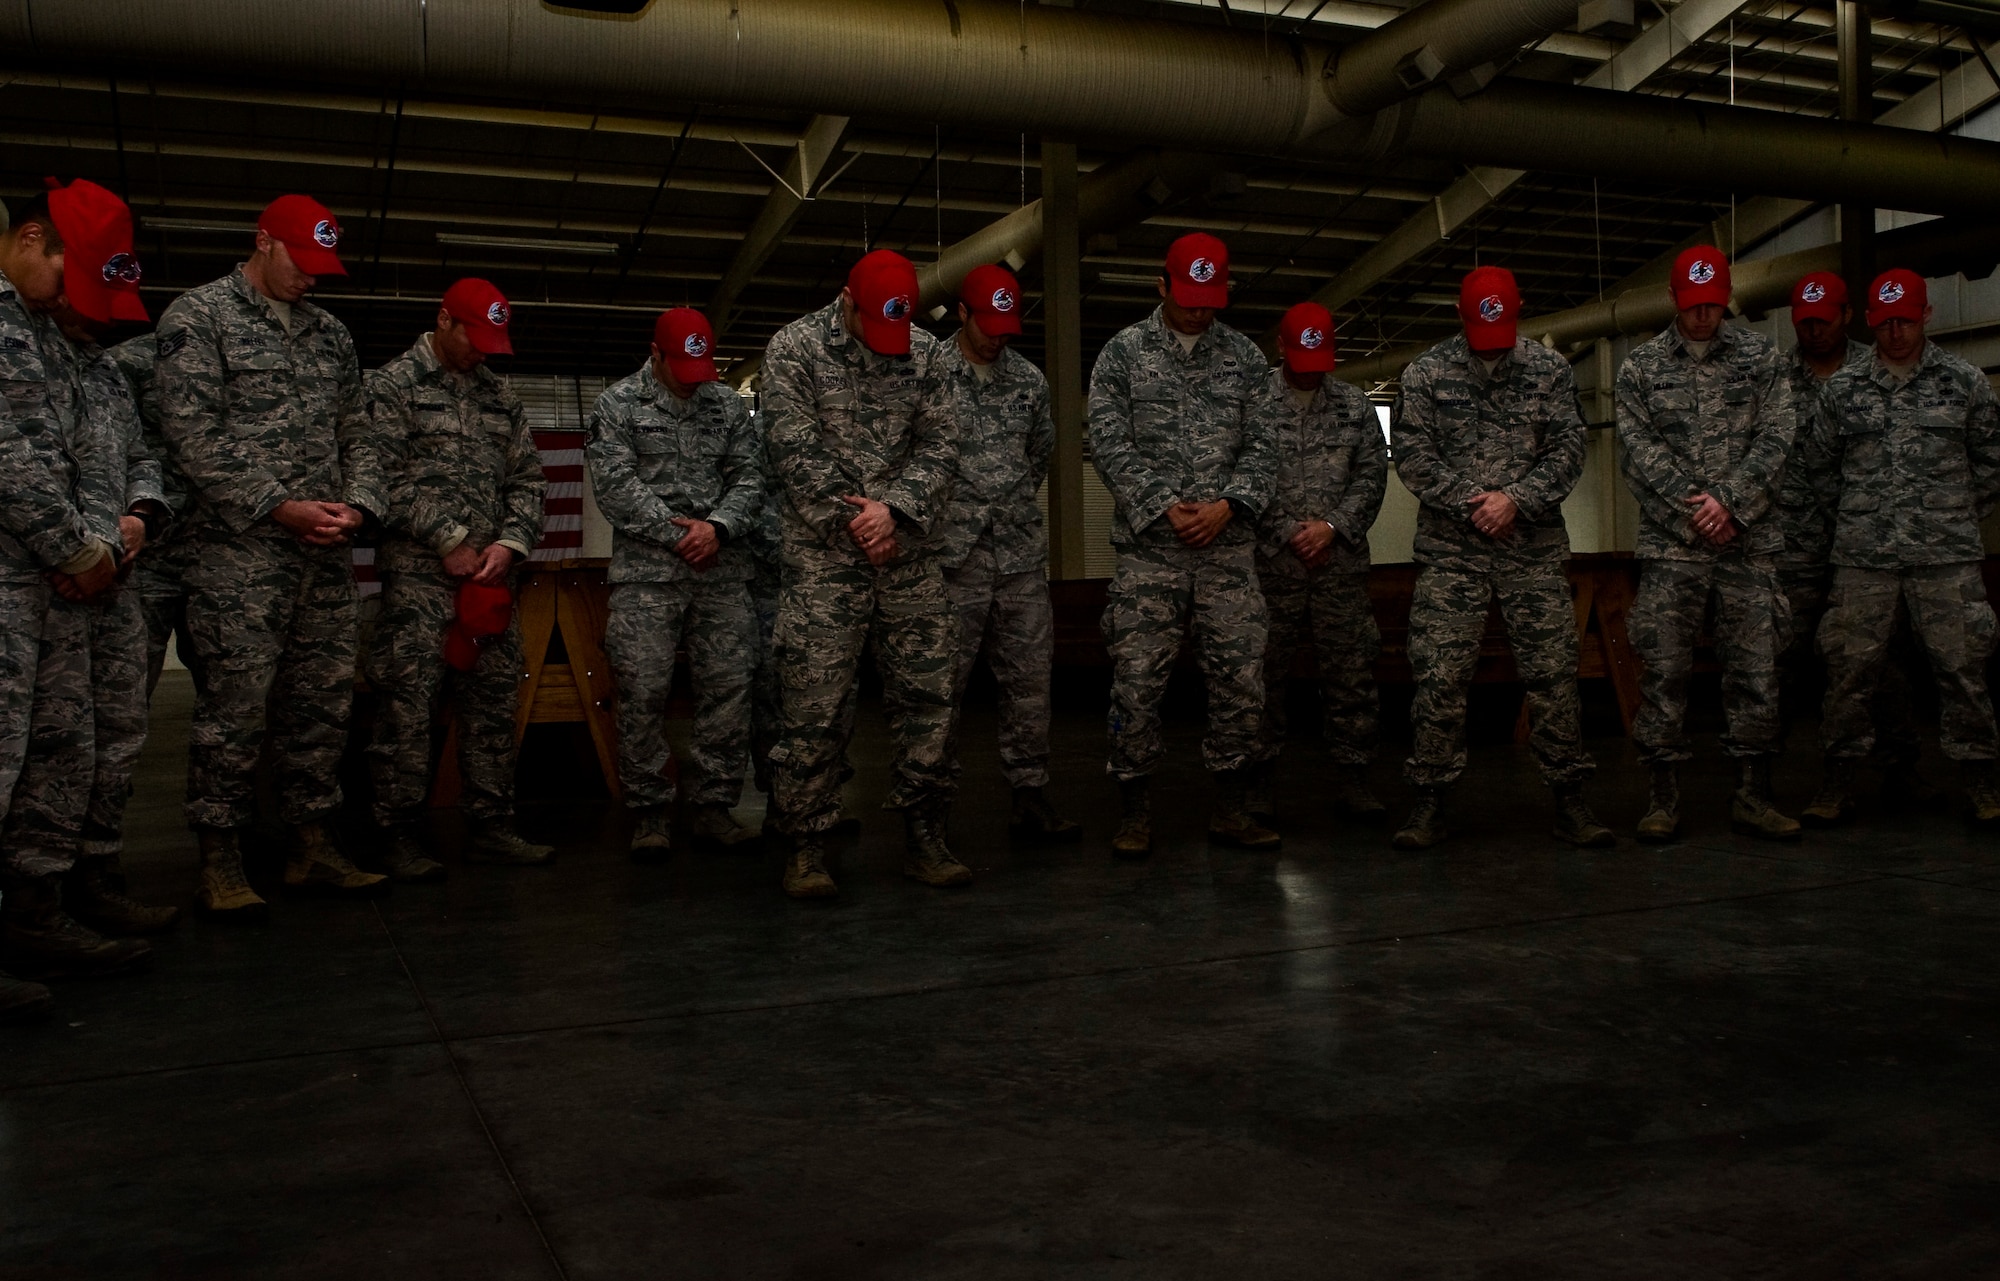 Airmen from the 820th RED HORSE Airborne Flight, Nellis Air Force Base, Nev., have a moment of silence March 1, 2013, at Fort Bragg, N.C., for Retired U.S. Air Force Brig. General William T. Meredith, who passed away earlier in the week. Meredith was instrumental in the creation of RED HORSE squadrons in the Air Force. (U.S. Air Force photo by Senior Airman Daniel Hughes)